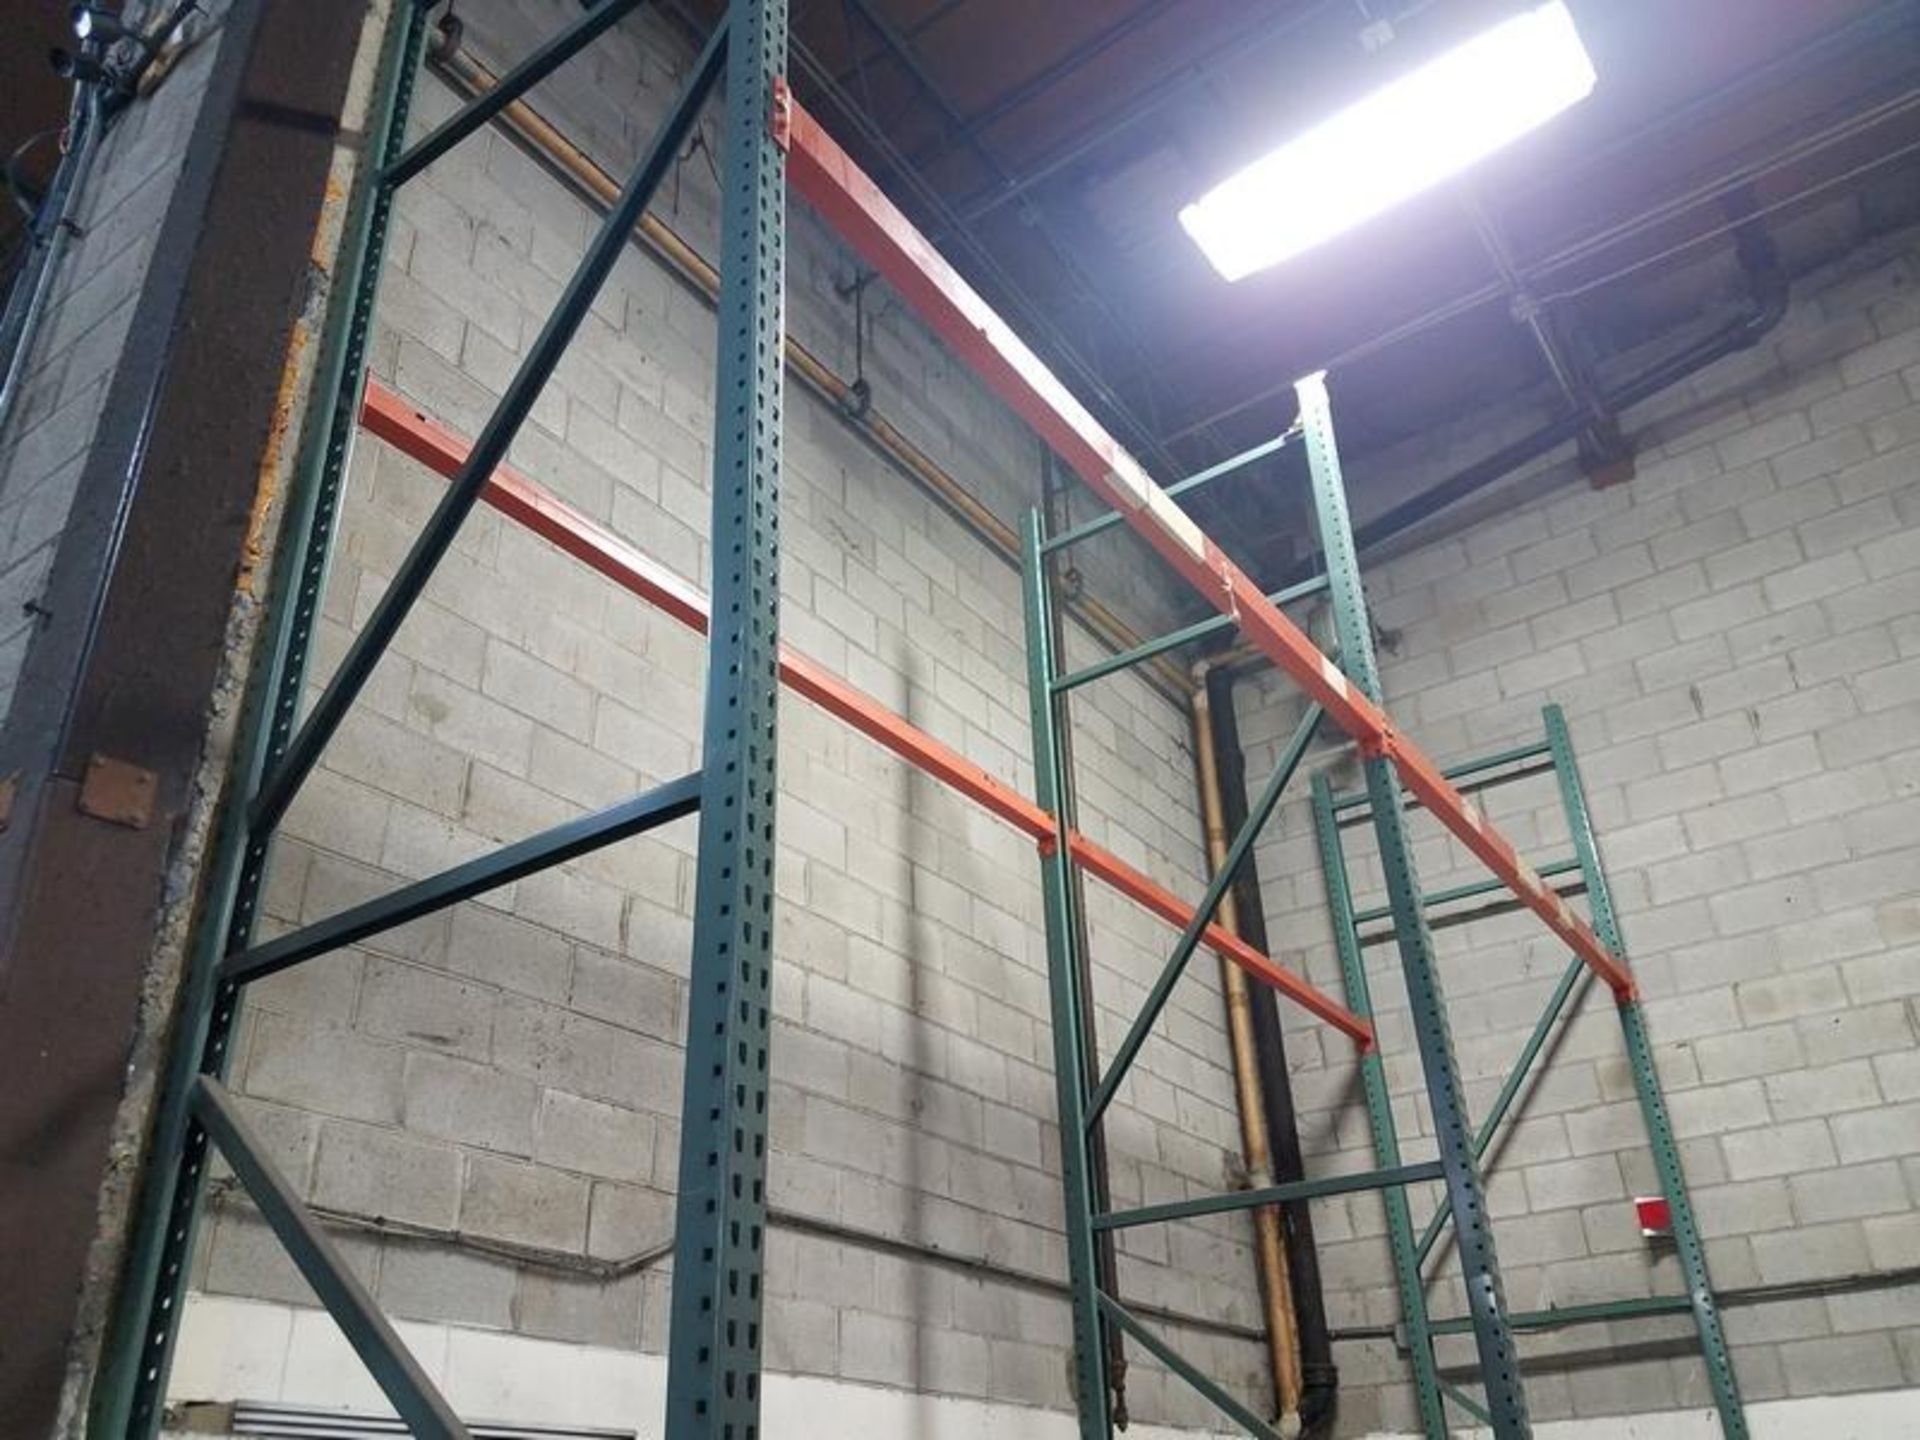 LOT (2) Sections of Adjustable Pallet Racking, 9' x 48" x 18'H - Image 2 of 4